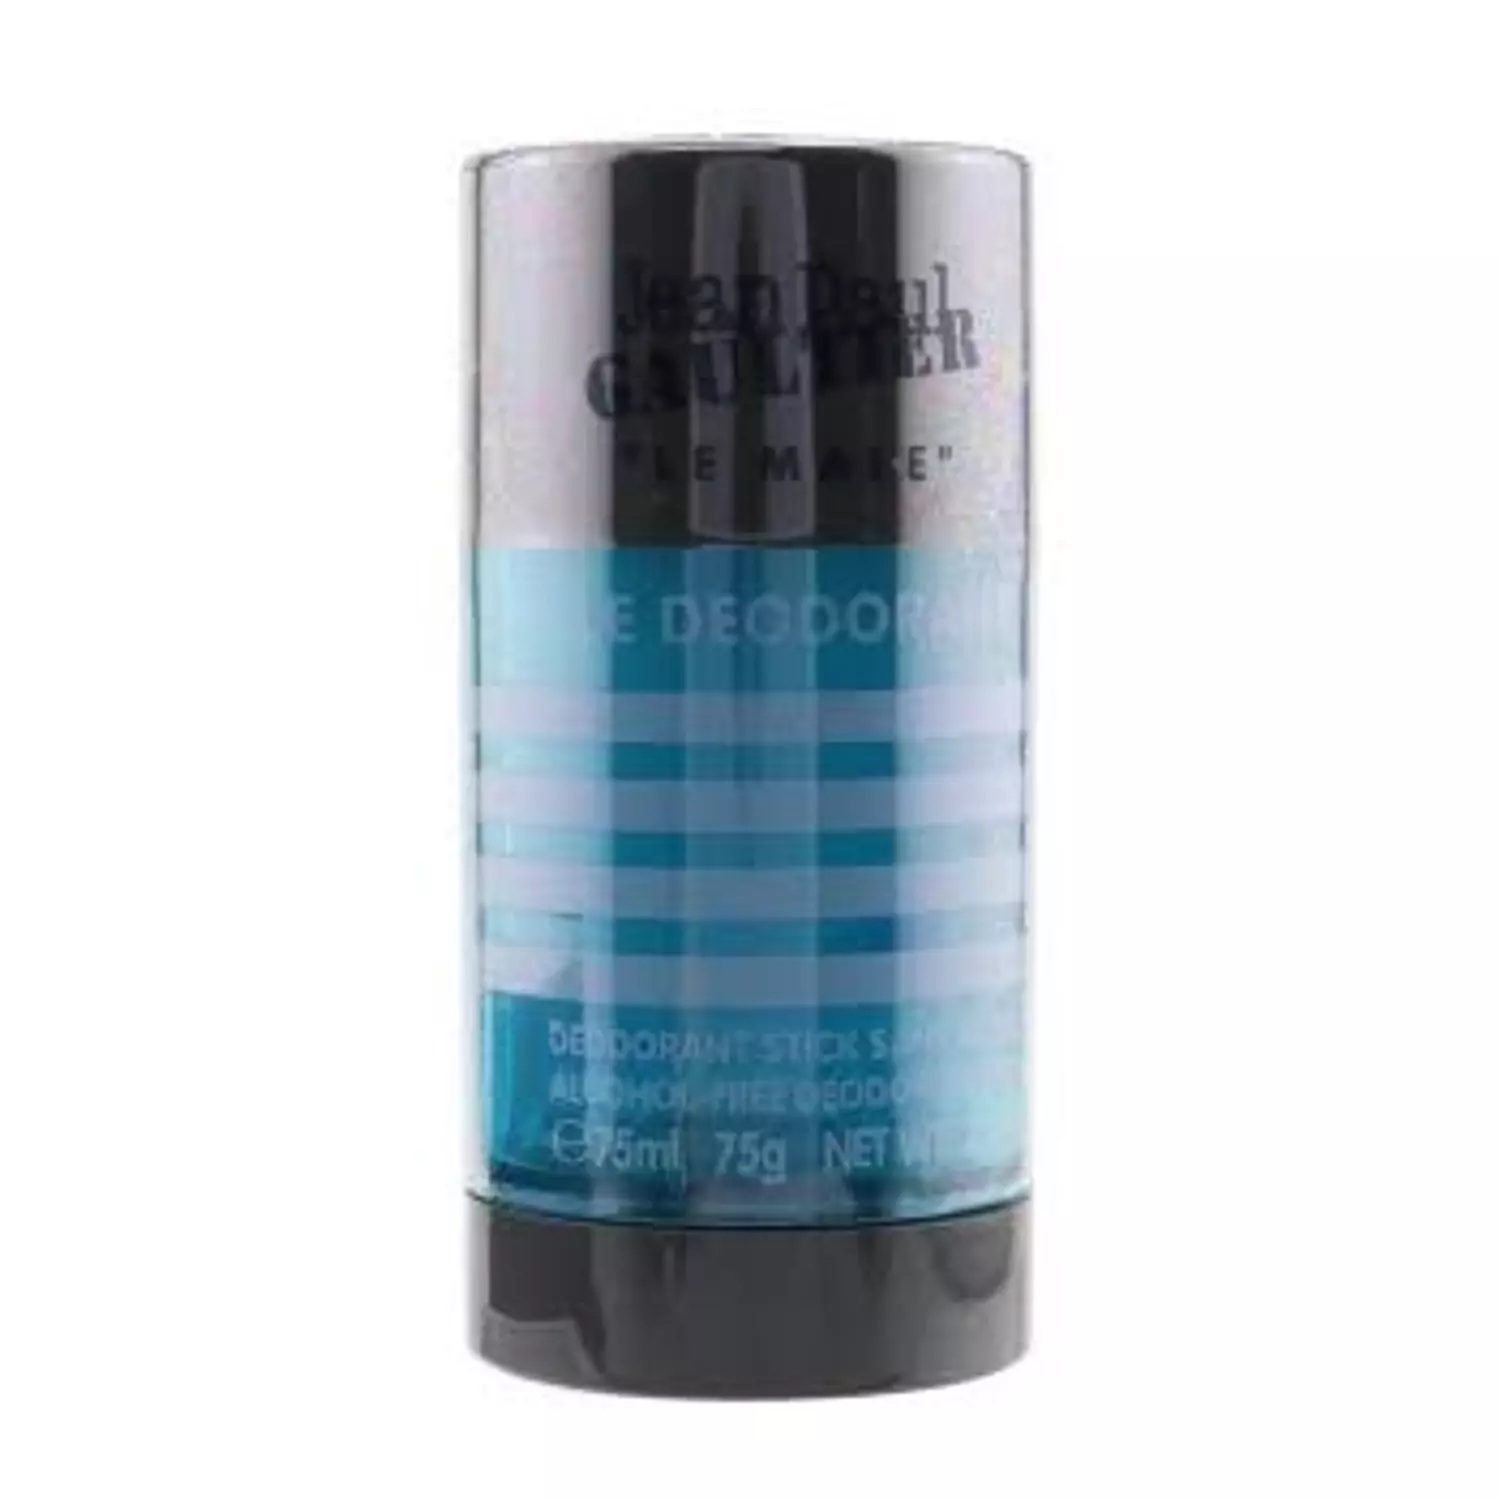 Jean Paul Gaultier Le Male Alcohol Free Deodorant Stick hover image